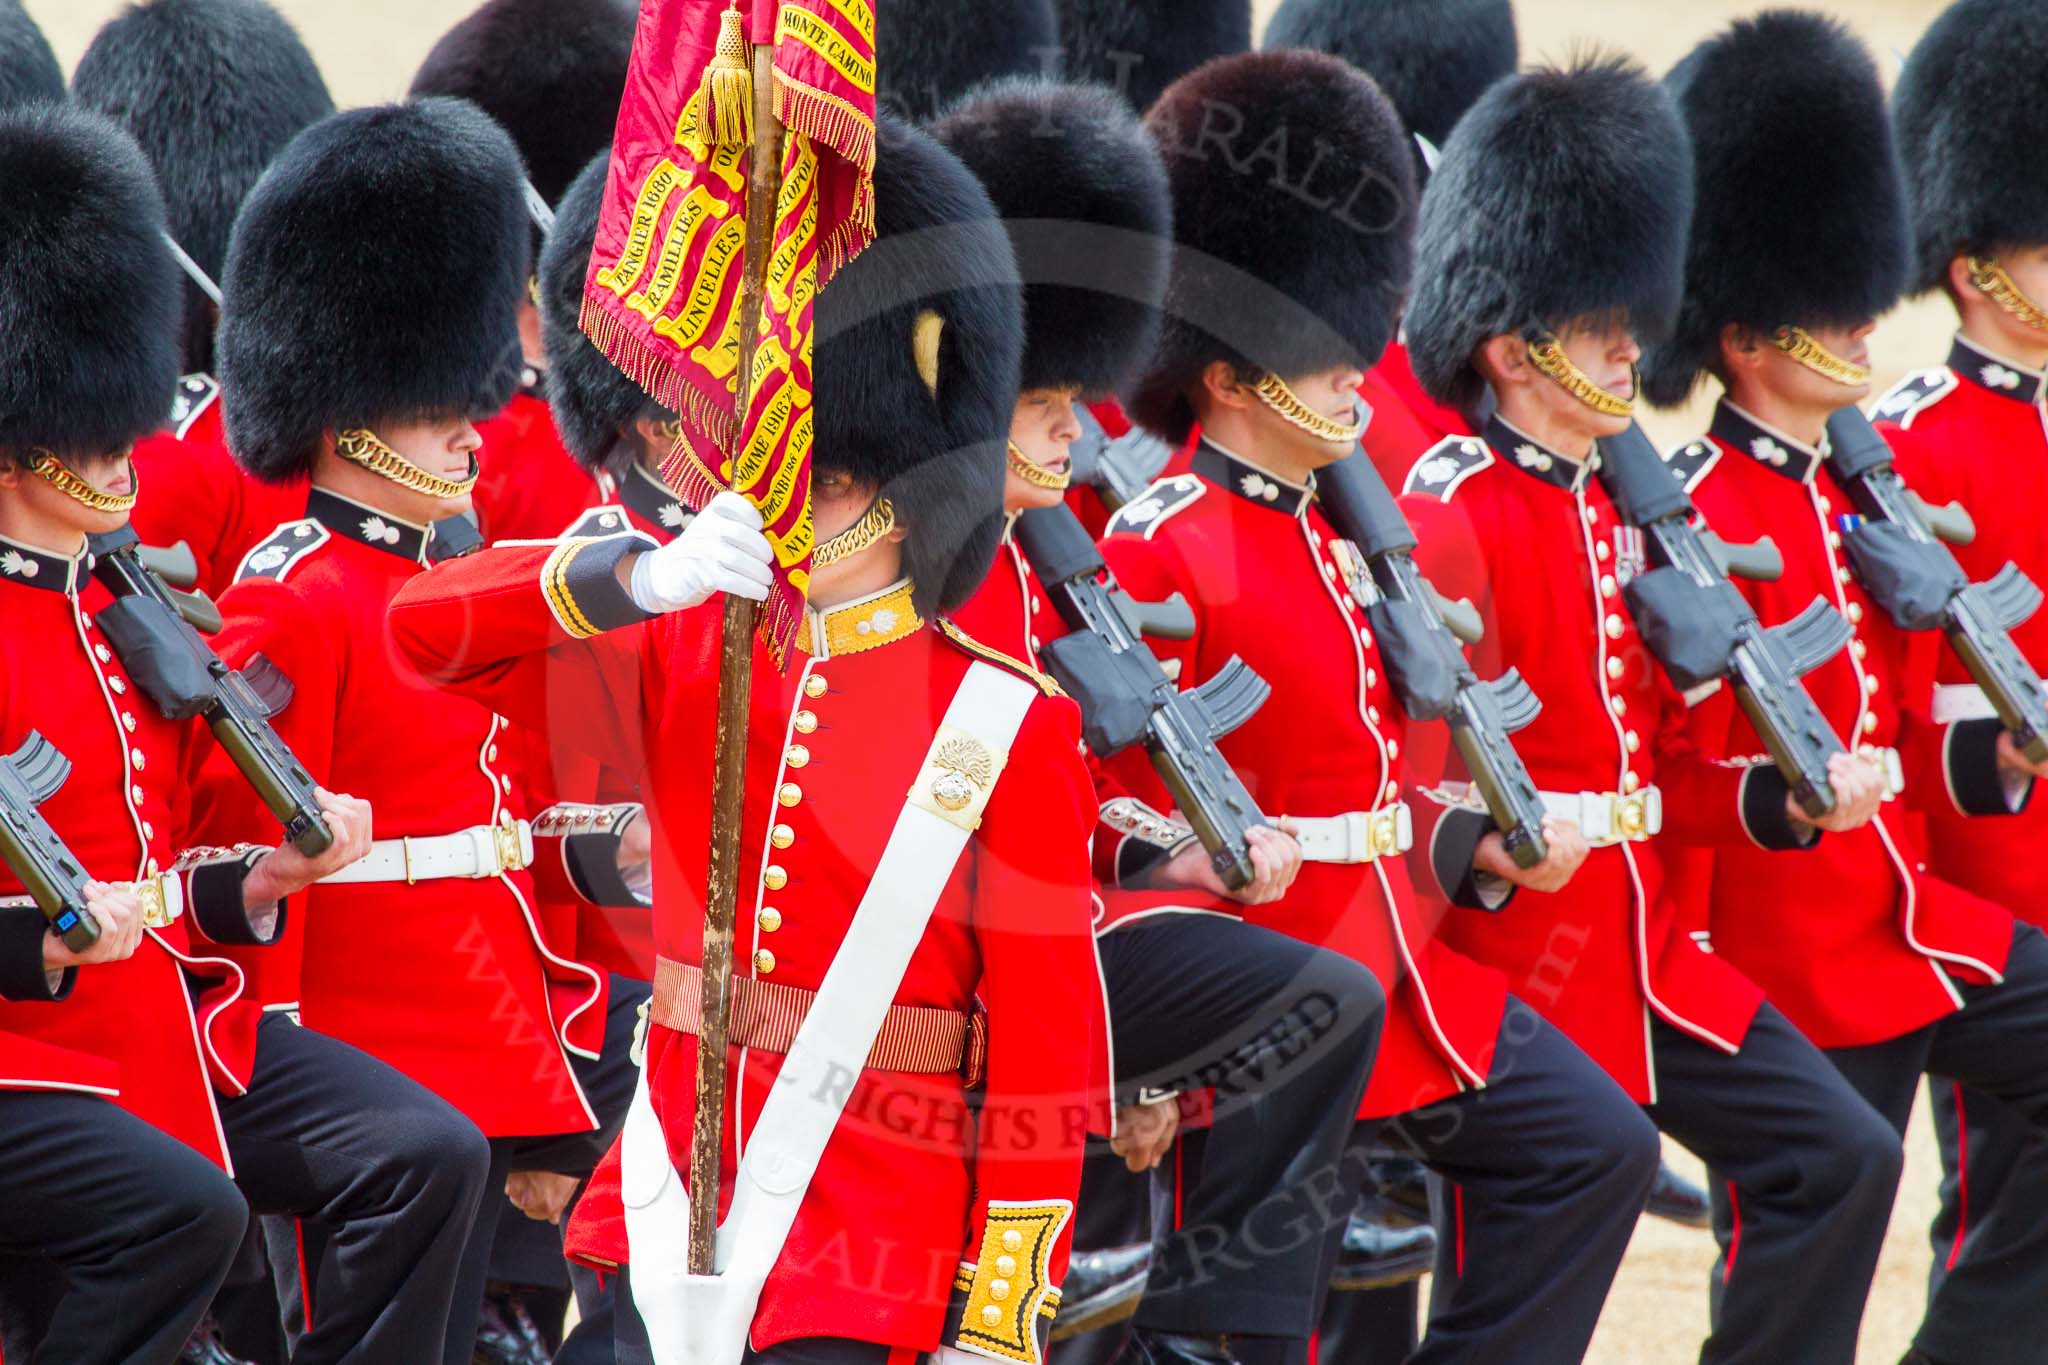 Trooping the Colour 2014.
Horse Guards Parade, Westminster,
London SW1A,

United Kingdom,
on 14 June 2014 at 11:36, image #618